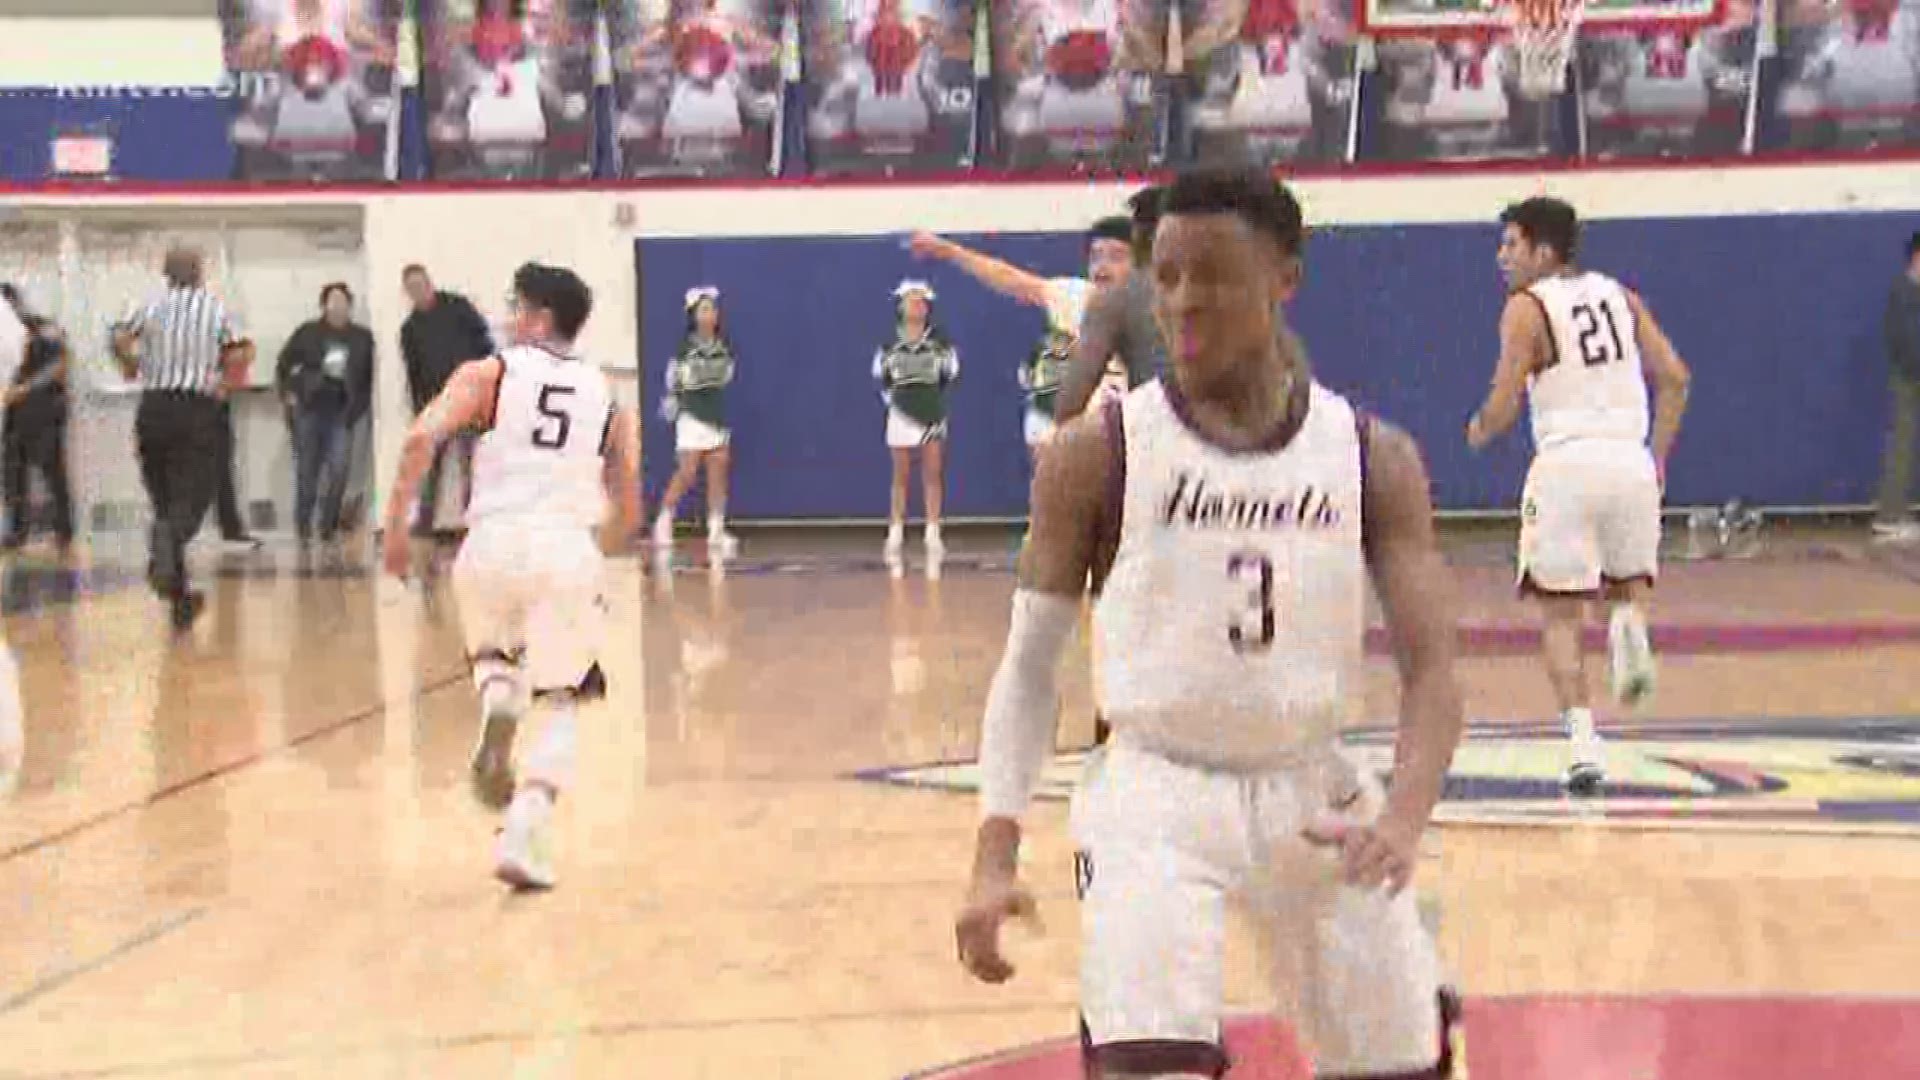 The Bi-District round of the boys basketball playoffs resumed Tuesday night, we have highlights of five games including teams from the Coastal Bend.